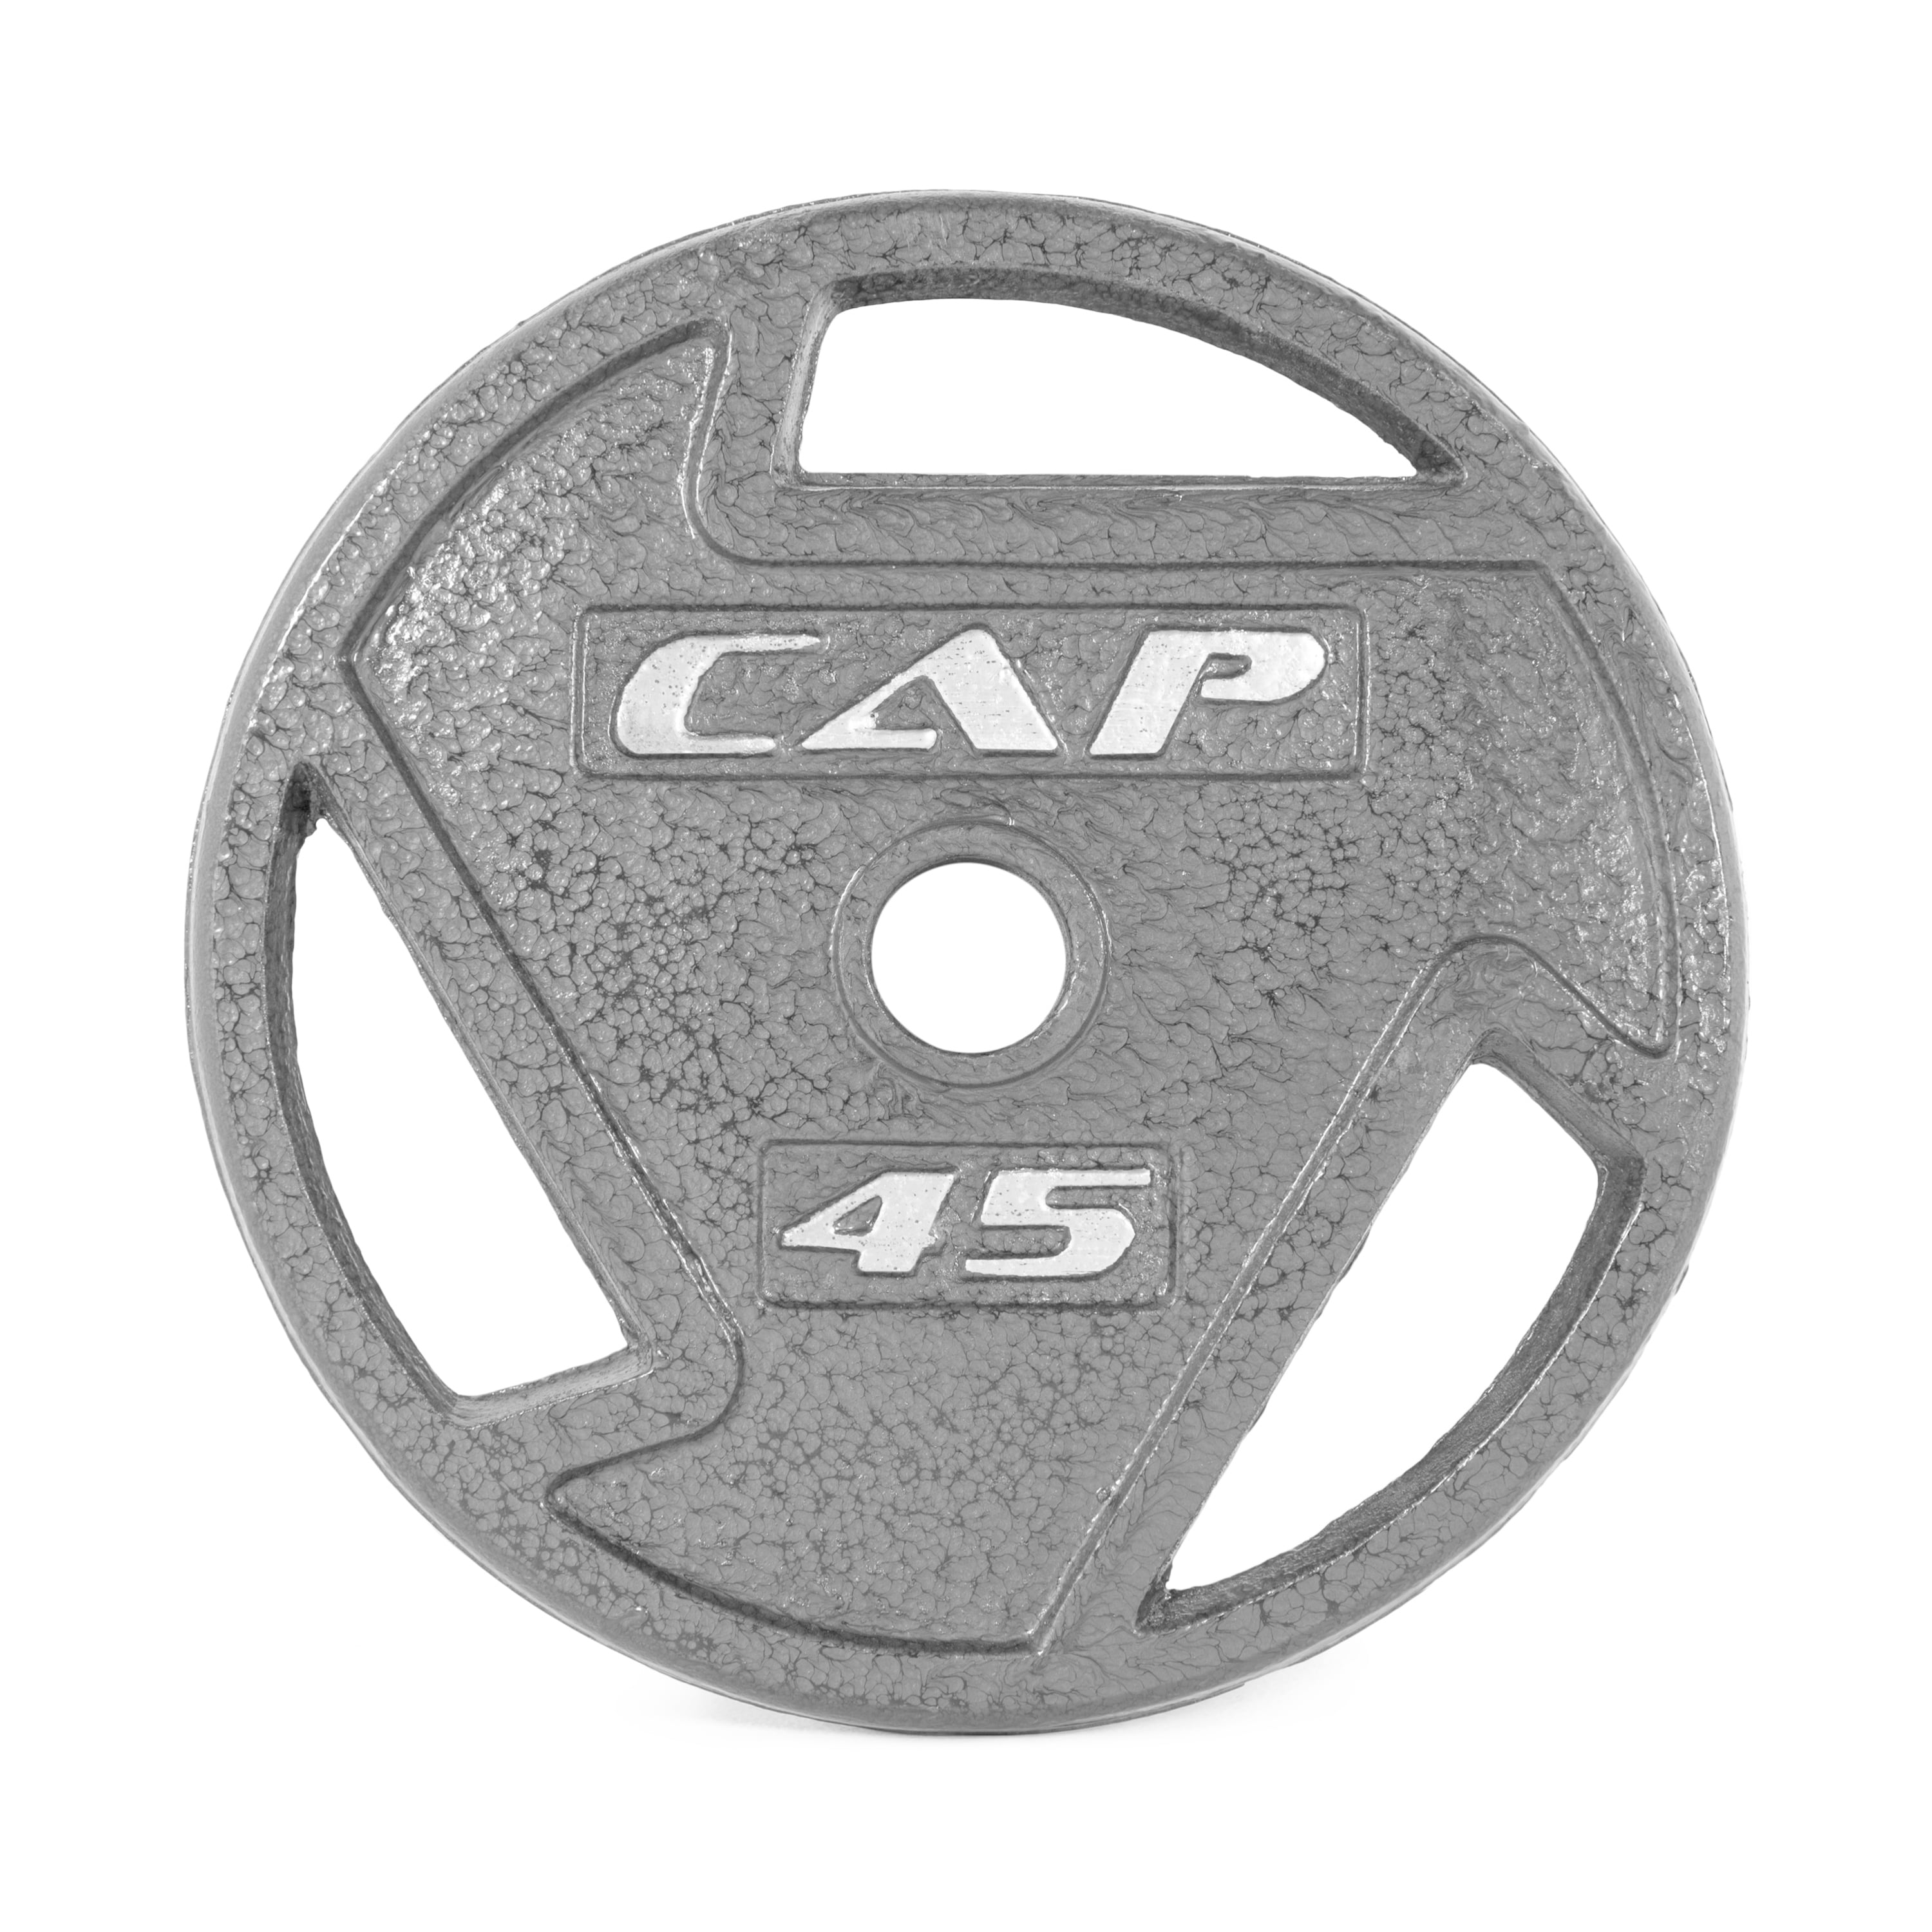 total 20 LB 10 lb CAP Olympic 2” Qty 2 Weight Plates FREE PRIORITY SHIPPING 